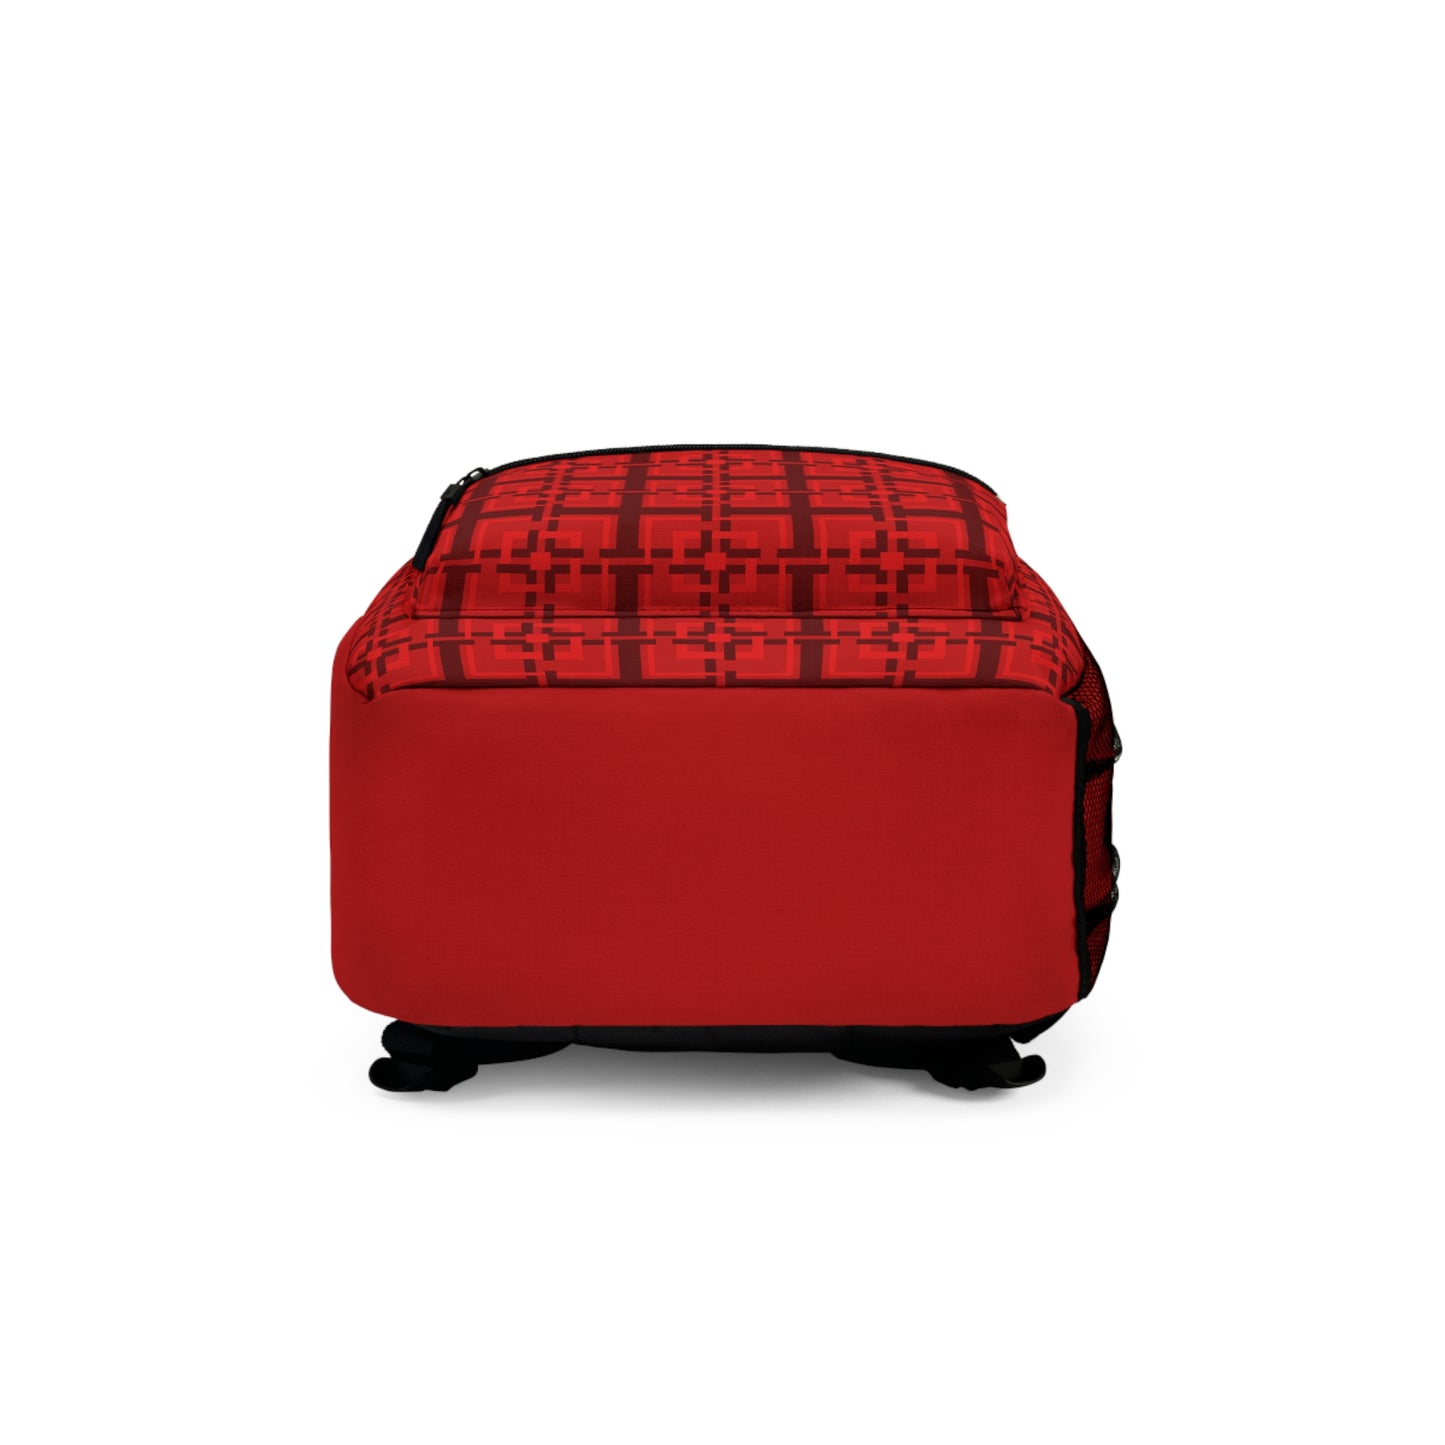 Intersecting Squares - Red - Backpack